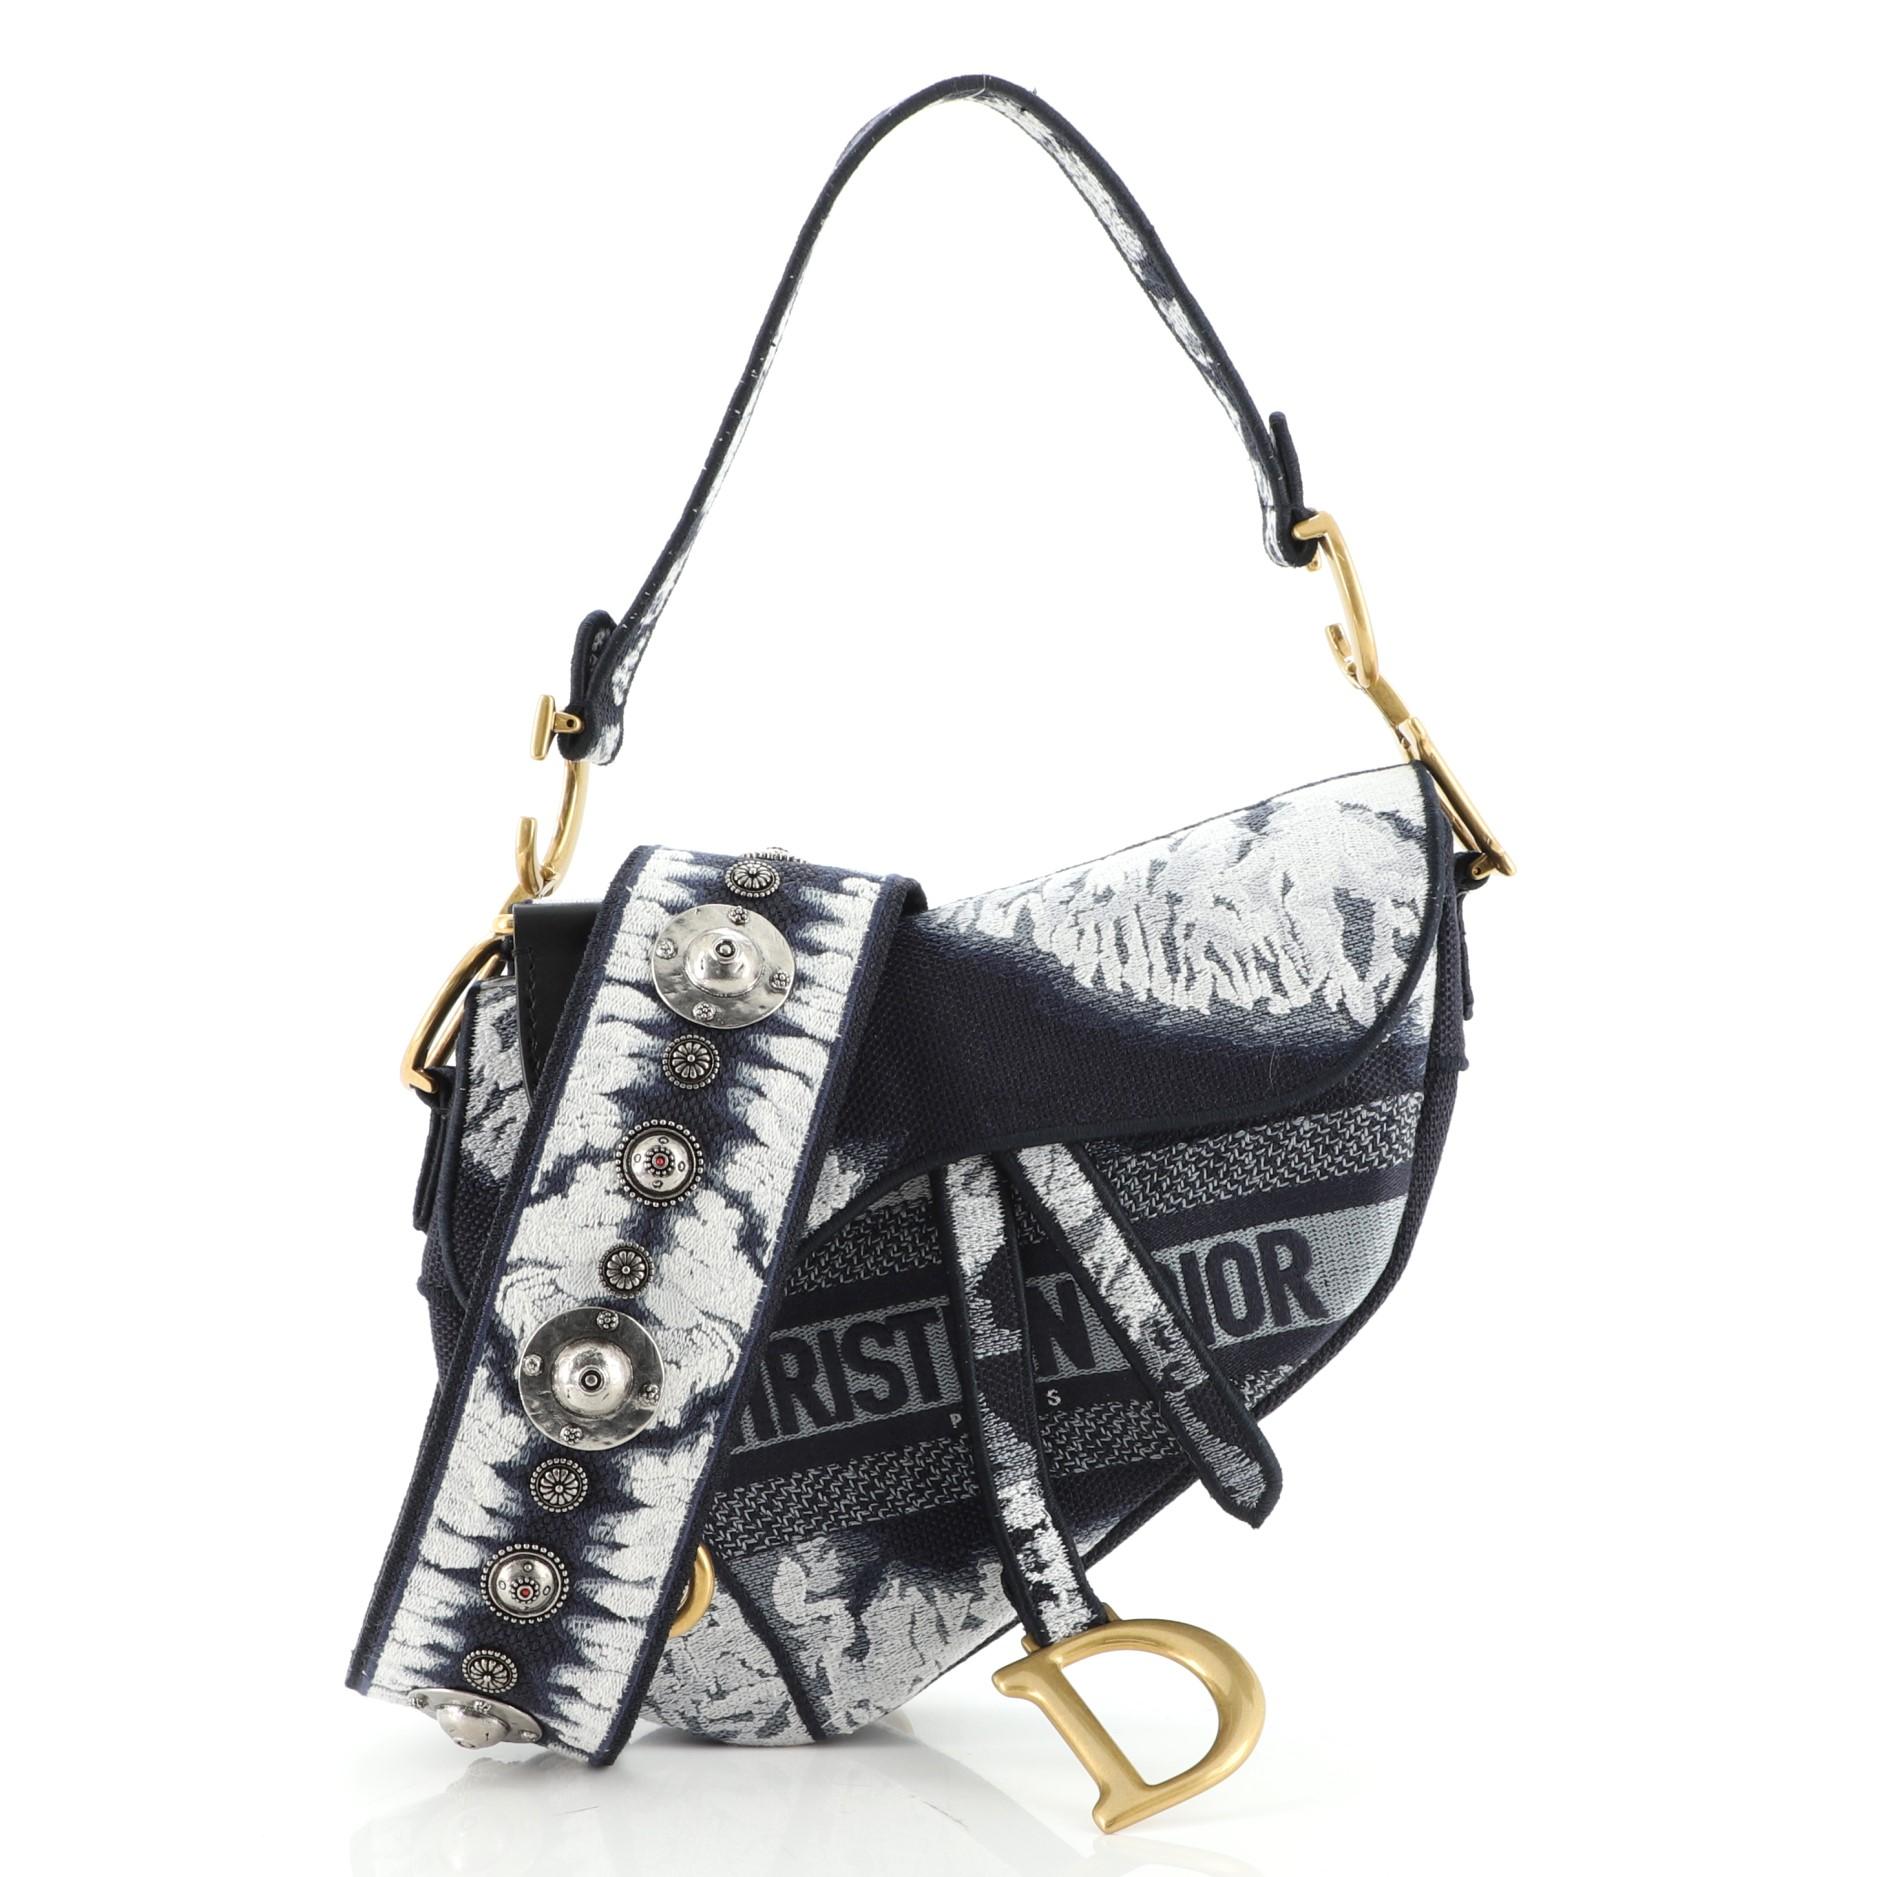 Fashion Trend Guide: The Look for Less - Christian Dior Saddle Bag